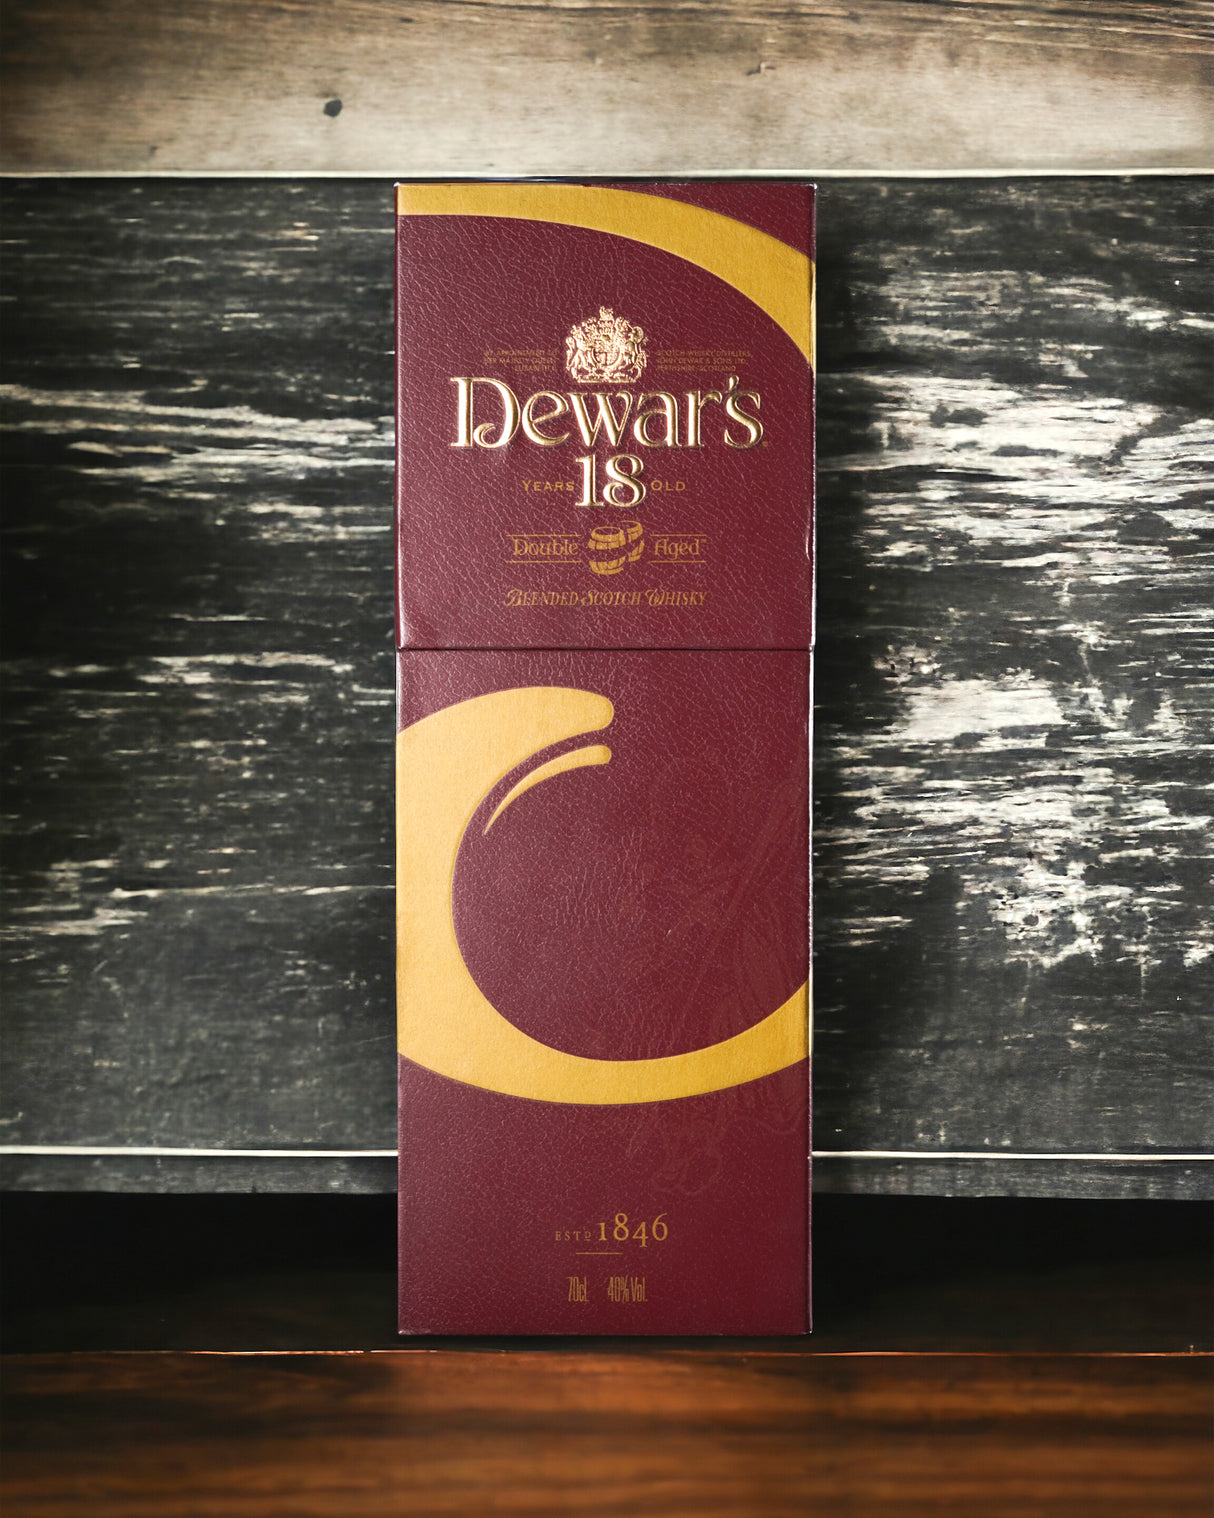 Dewar's 18 Year Old Founders Reserve